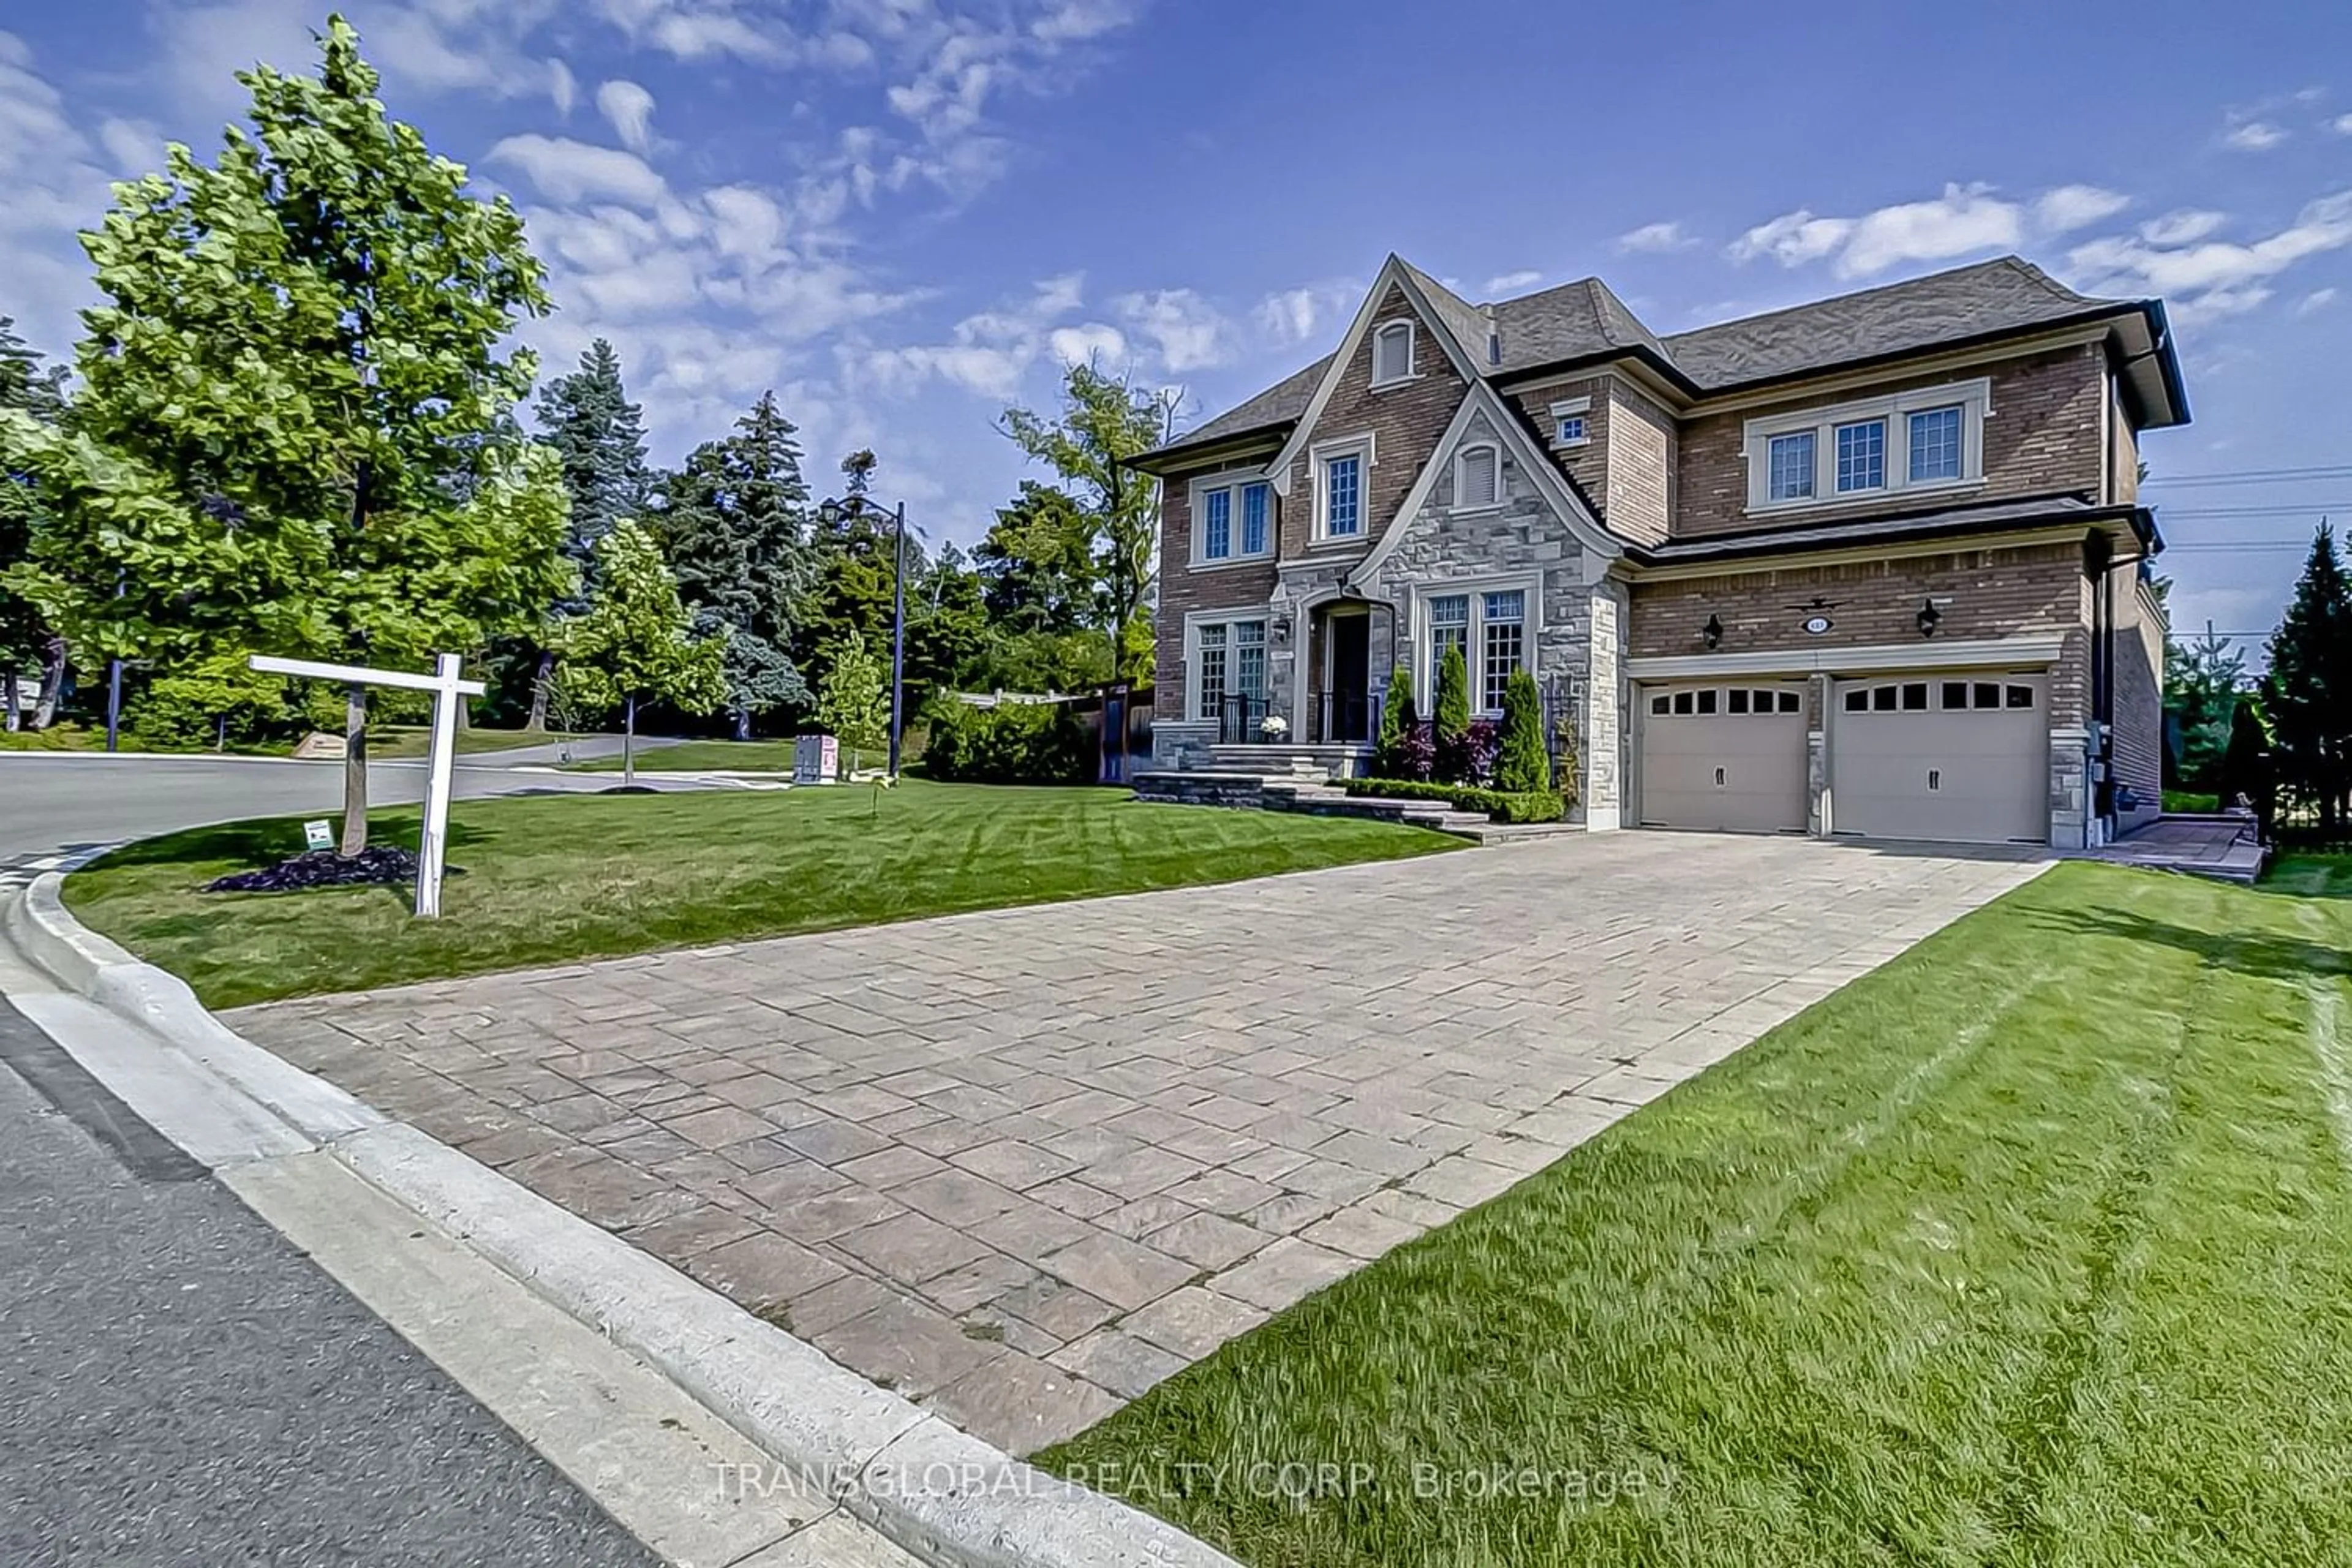 Home with brick exterior material for 141 Annsleywood Crt, Vaughan Ontario L4H 4G6